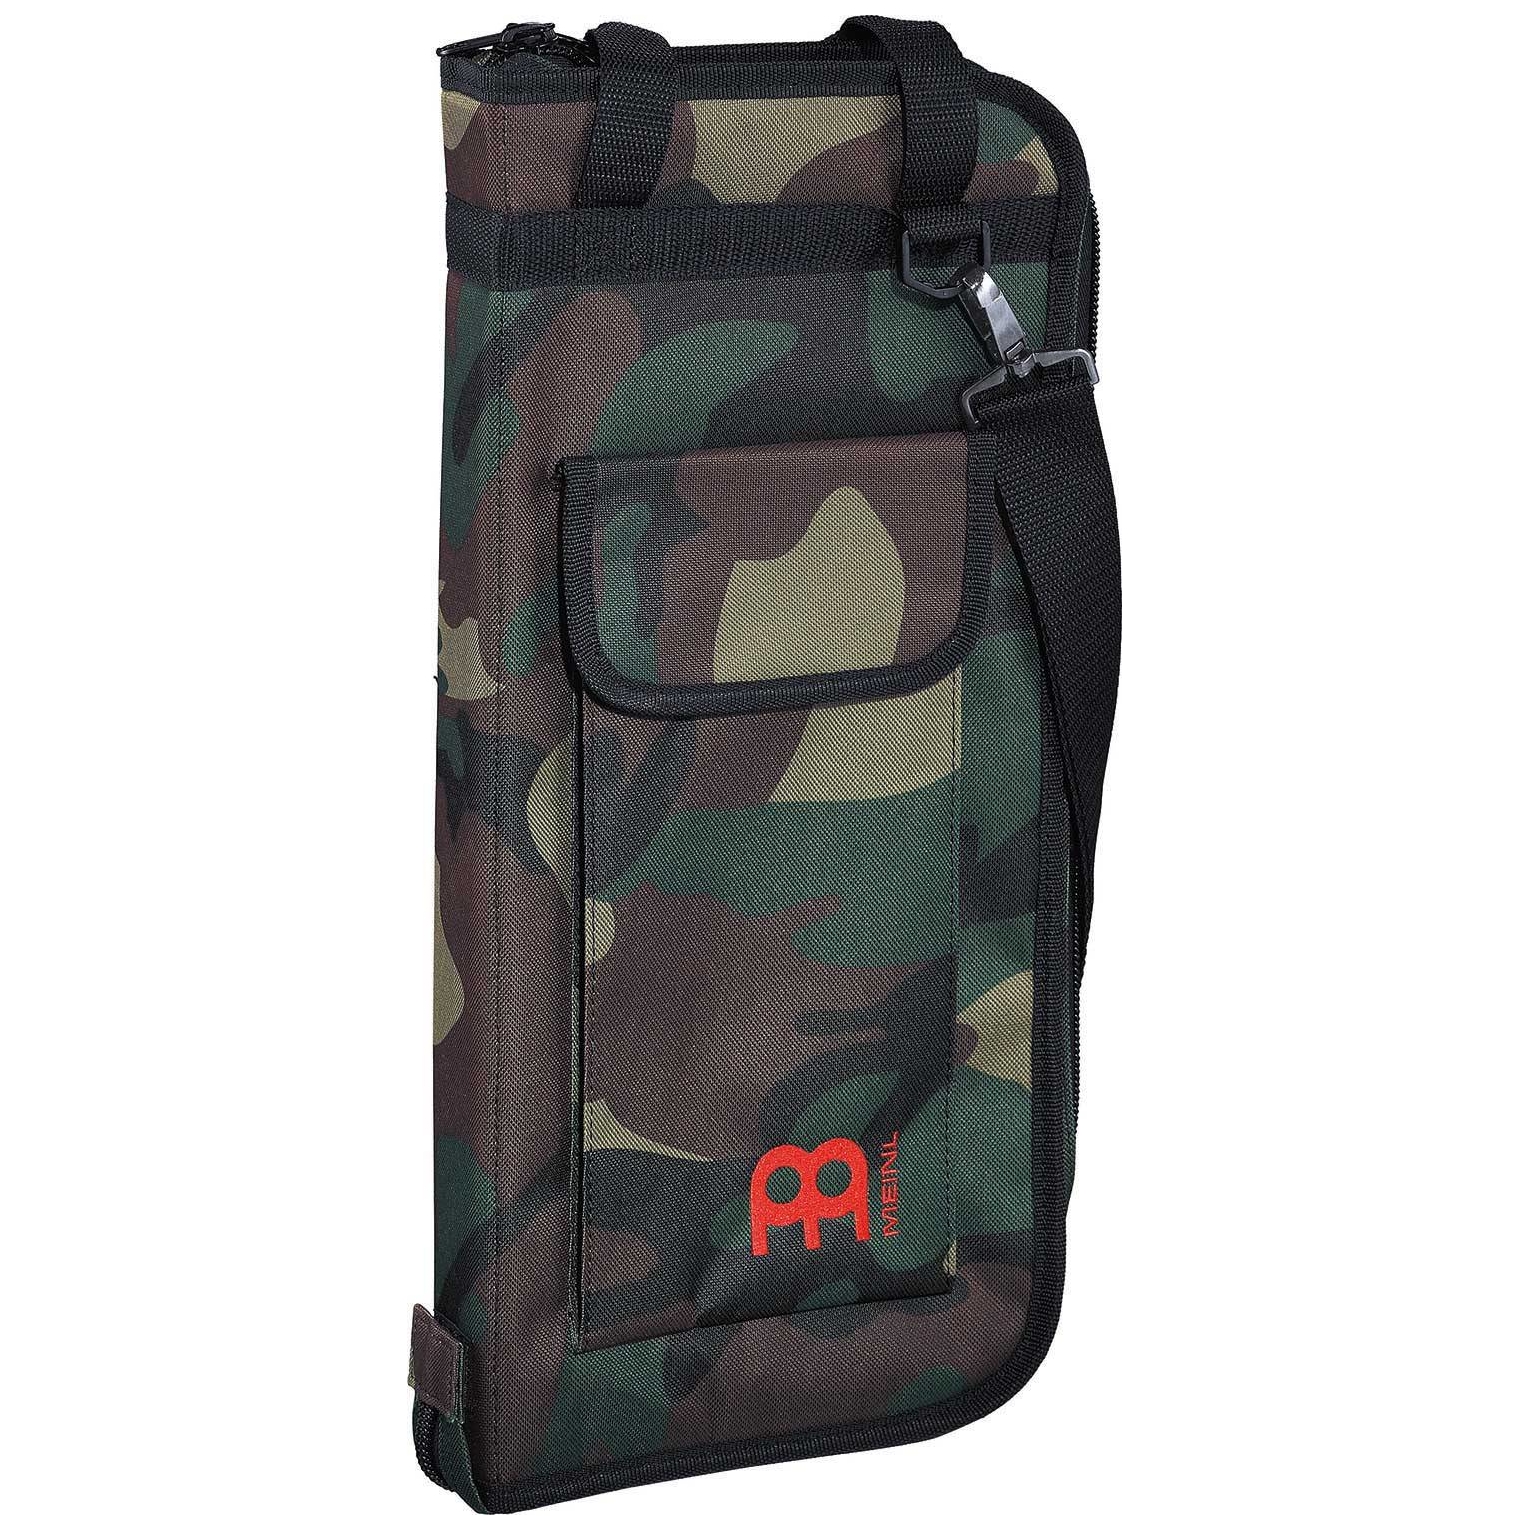 Meinl Cymbals MSB-1-C1 - Stick Bag Camouflage 